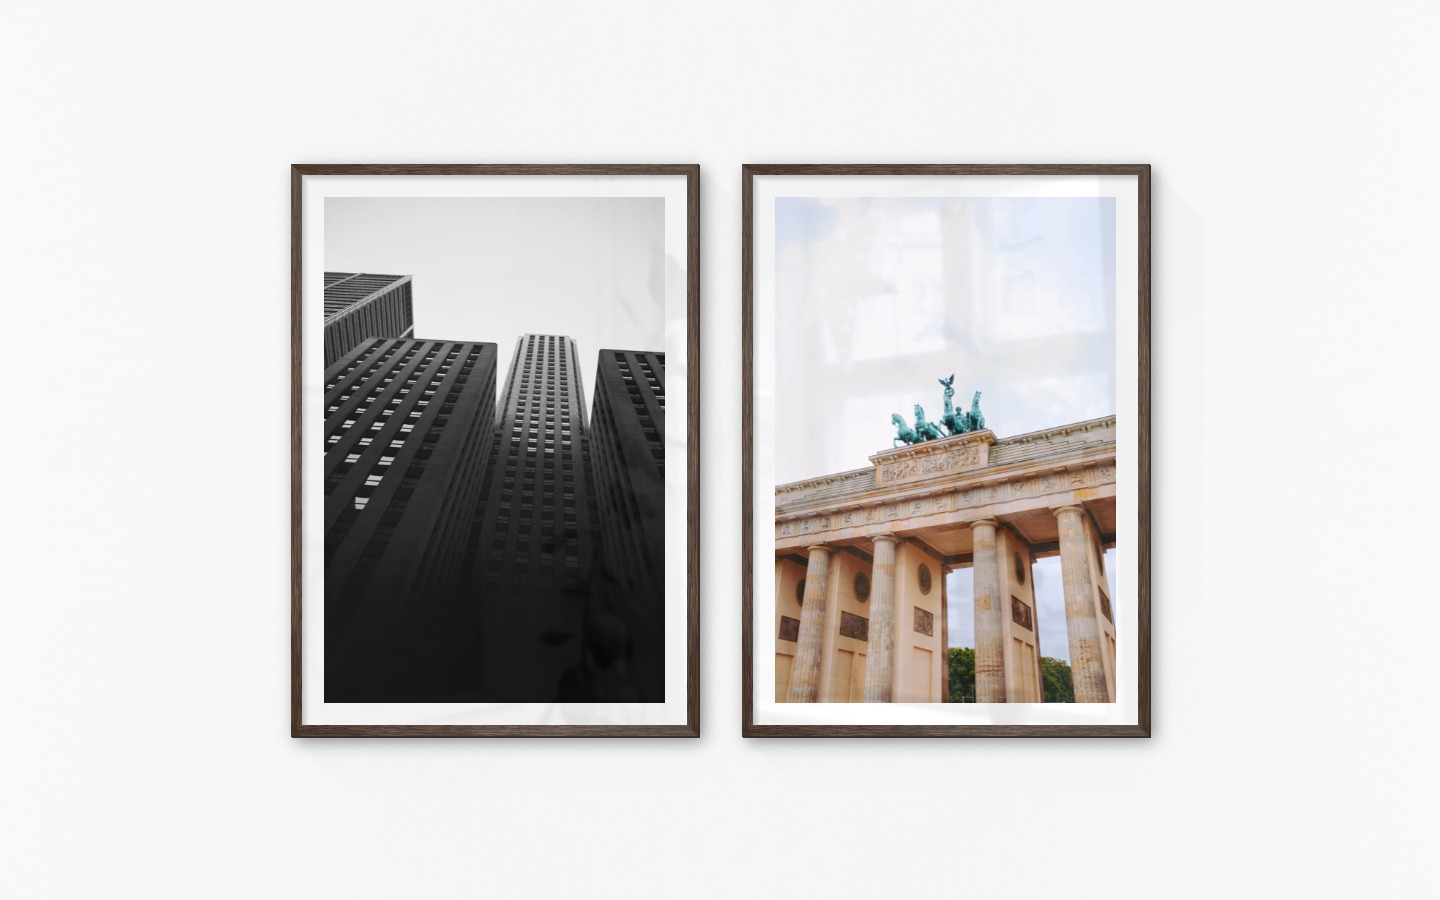 Gallery wall with picture frames in dark wood in sizes 70x100 with prints "High buildings" and "Berlin"